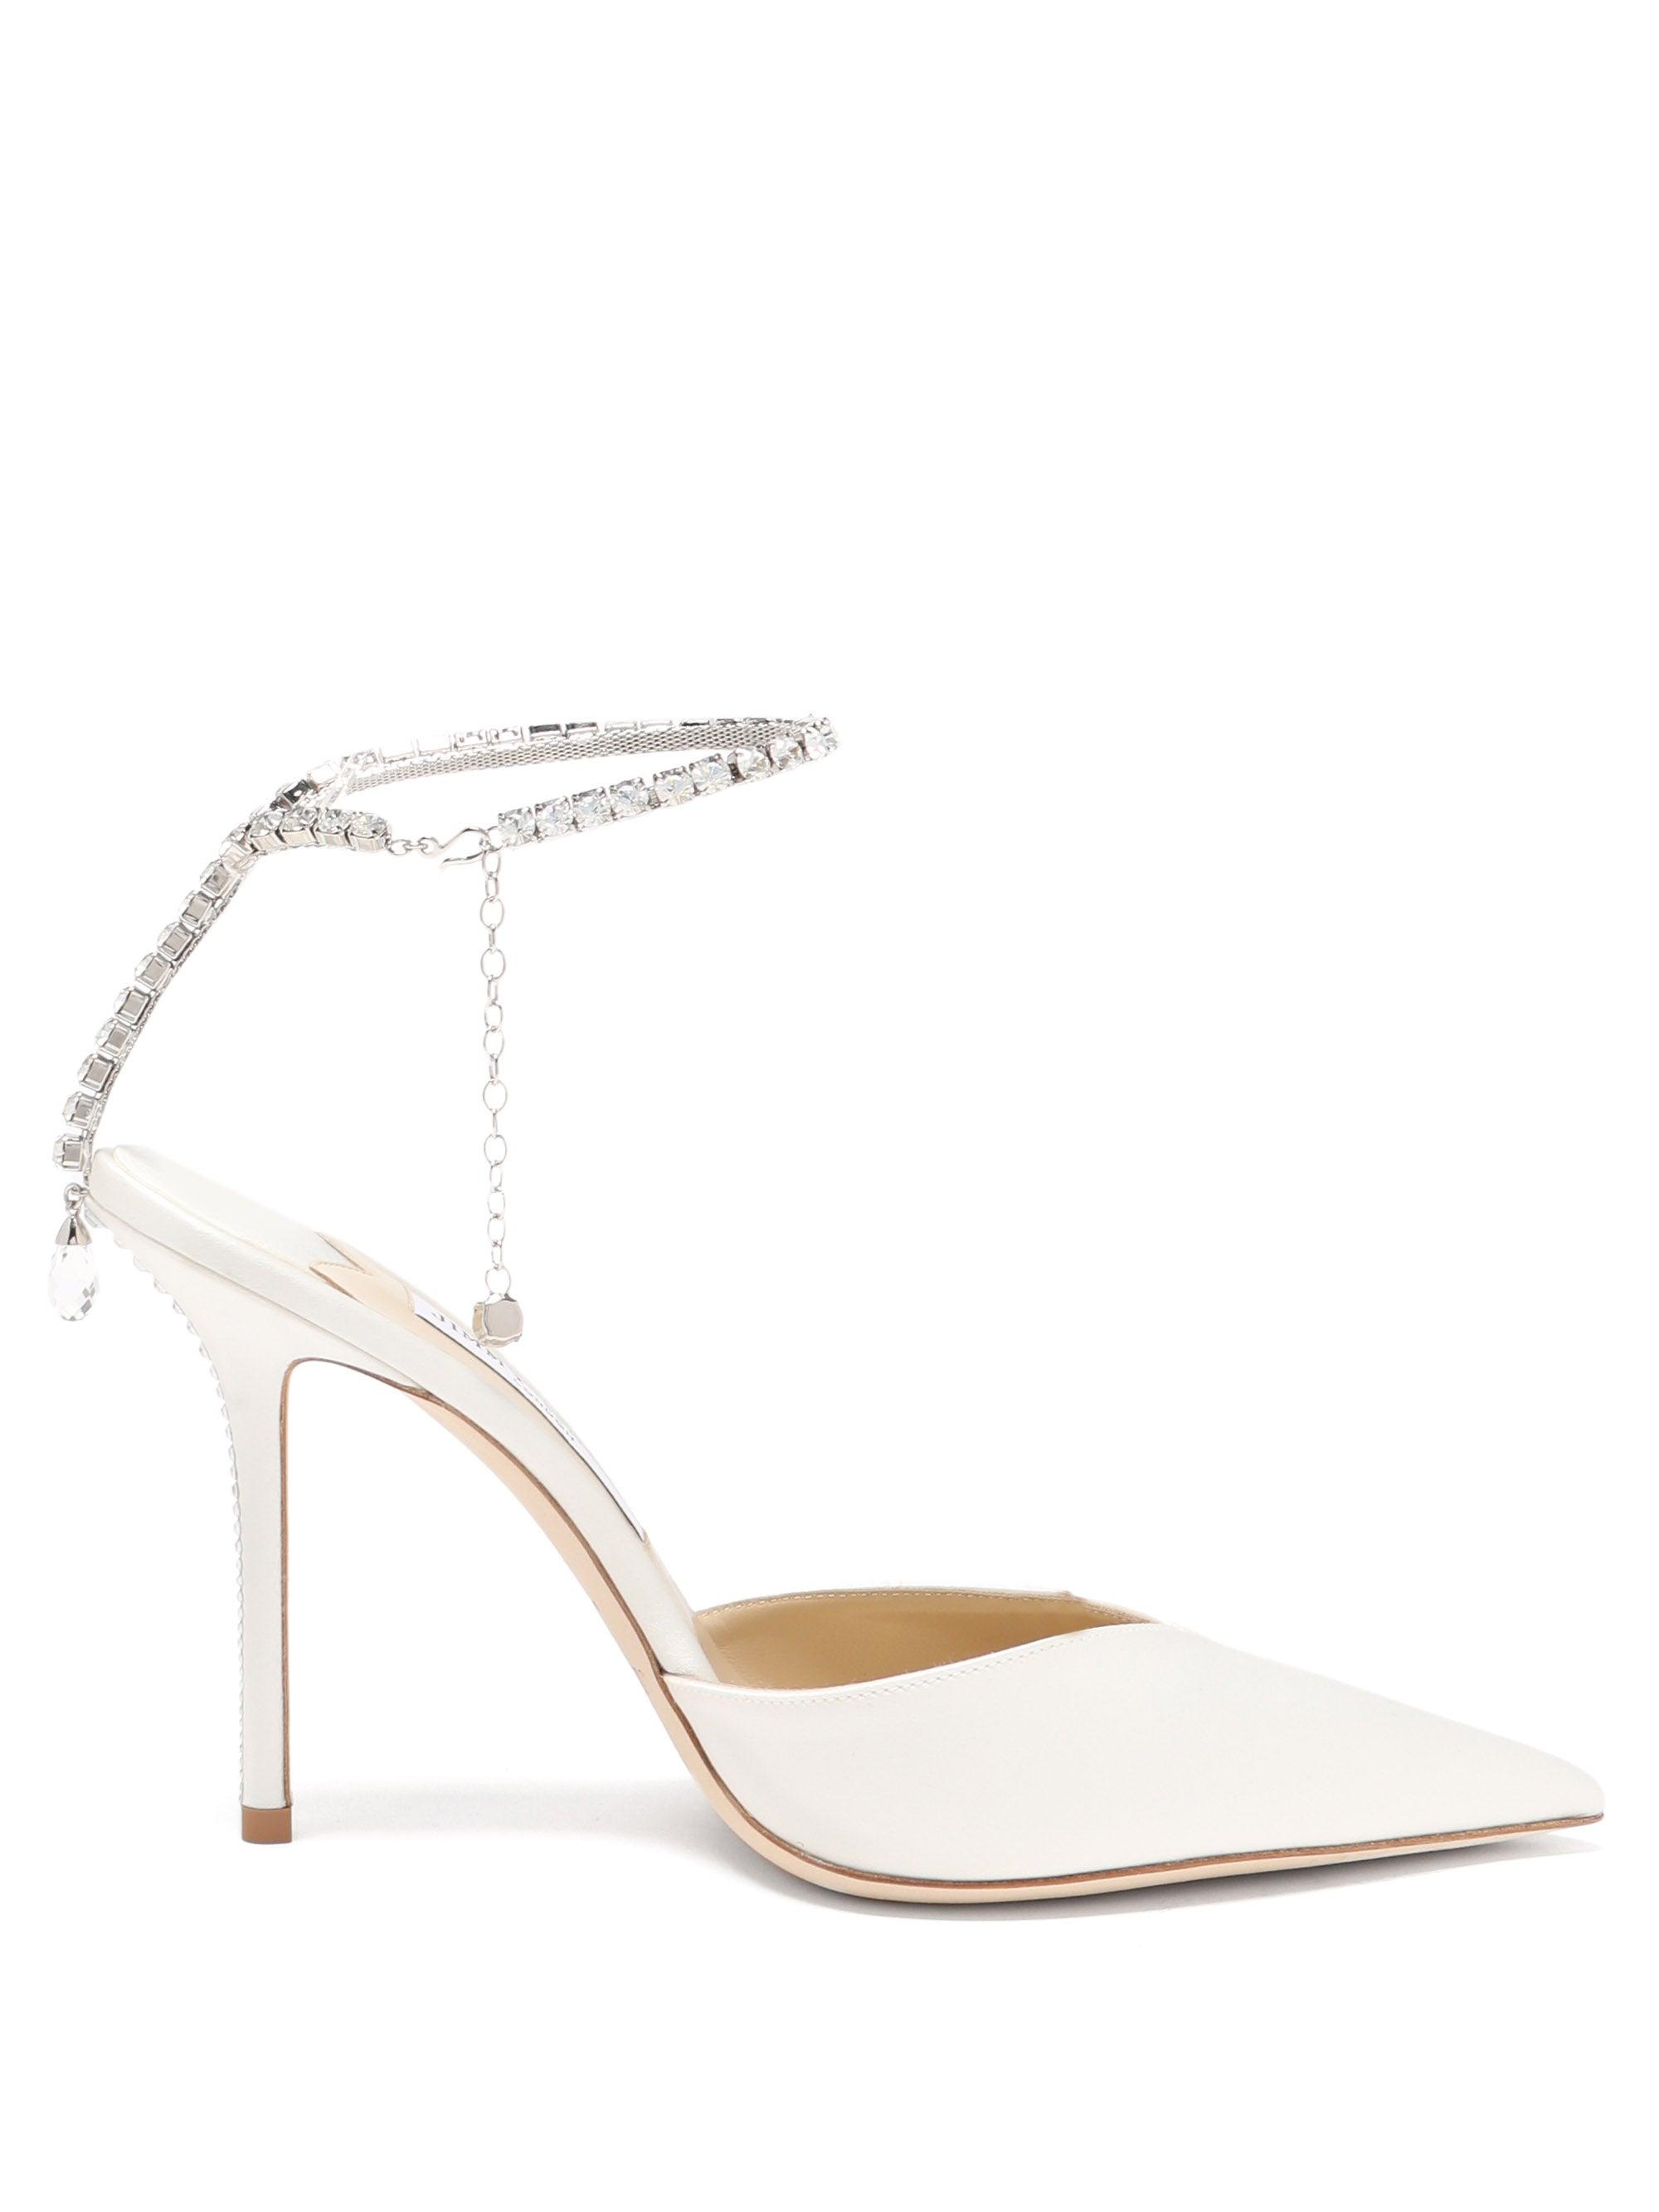 Jimmy Choo Saeda 100 Crystal-strap Leather Pumps in White | Lyst